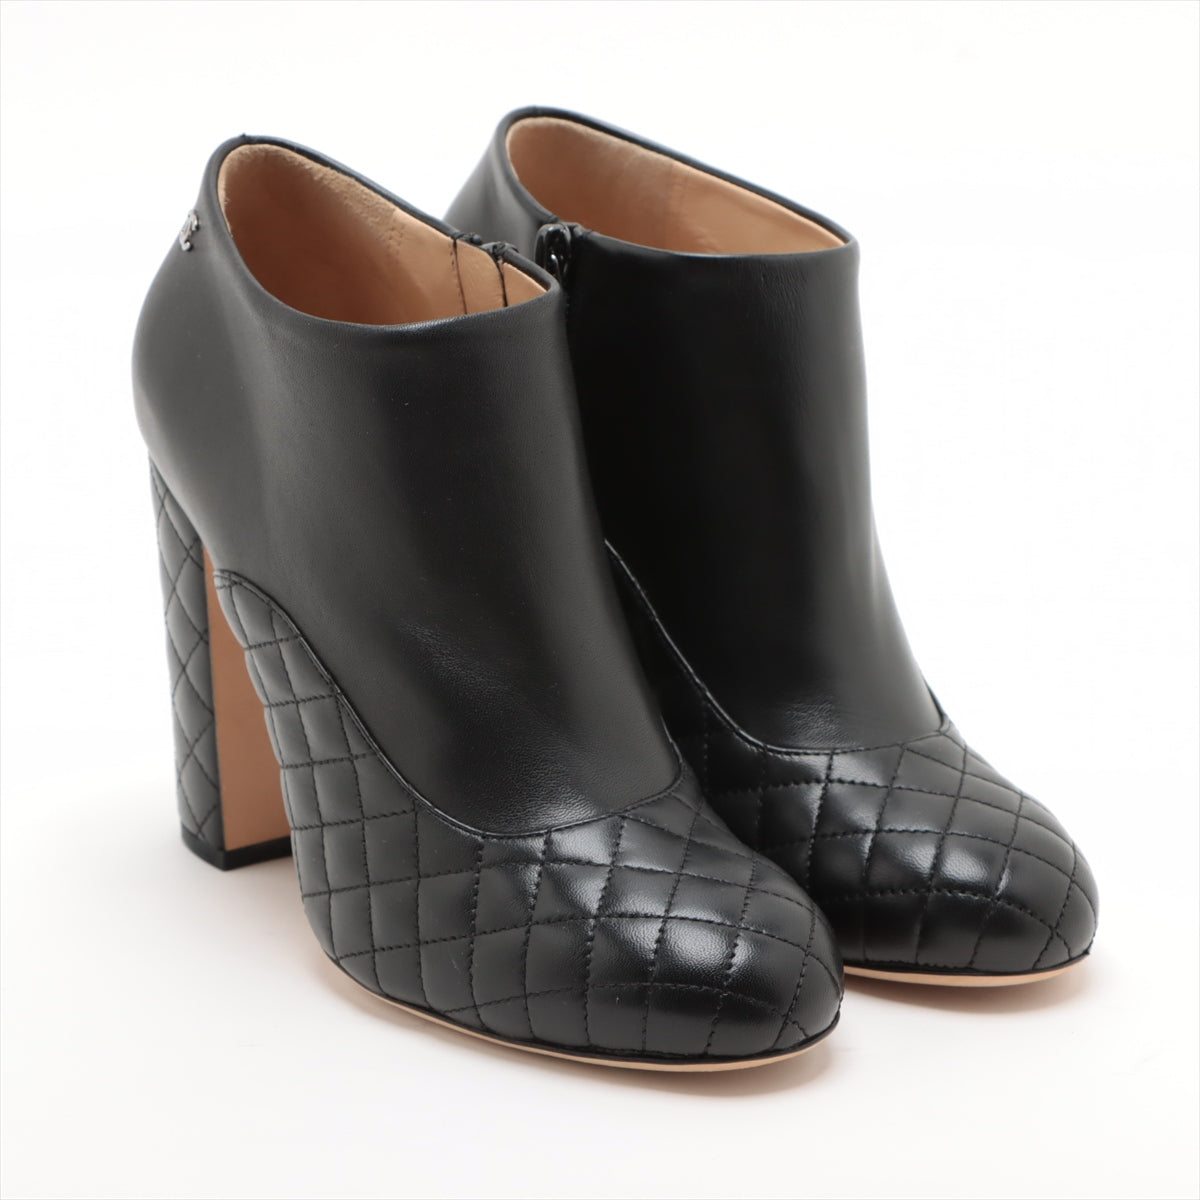 Chanel Coco Mark Leather Short Boots 39C Ladies' Black G31626 Matelasse Side zip There is a box